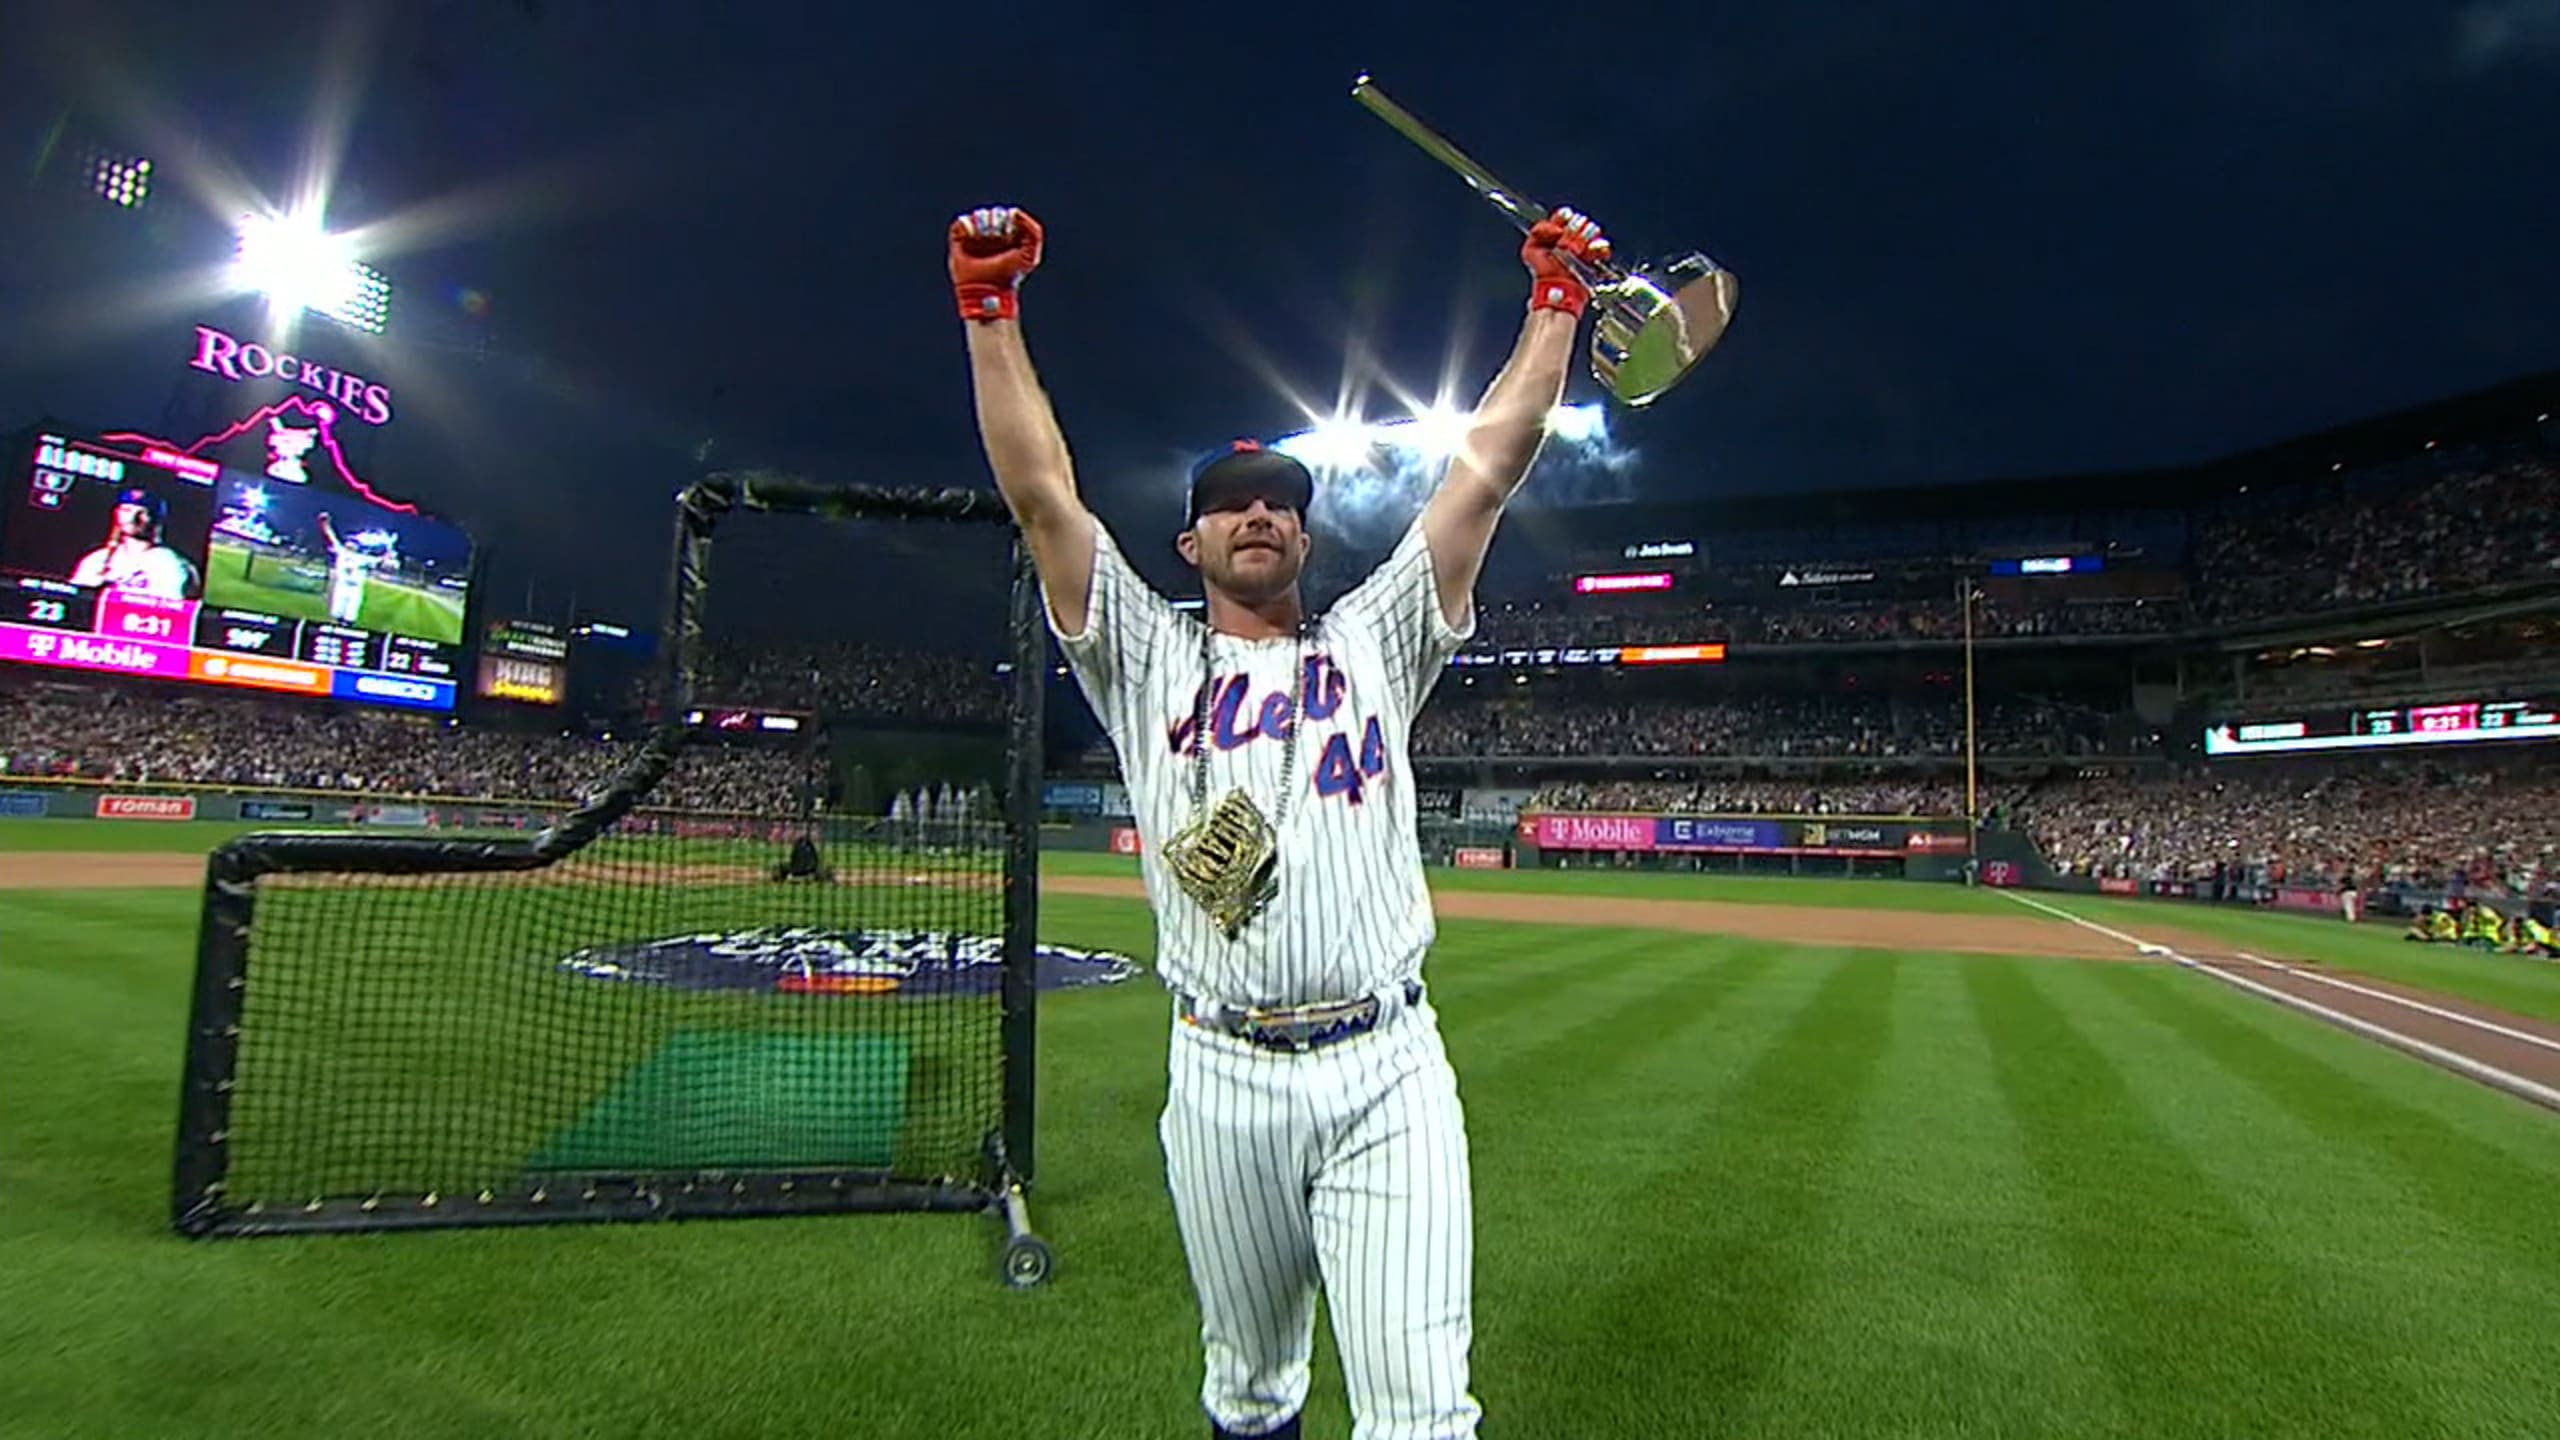 Photos: Mets' Pete Alonso repeats as All-Star Home Run Derby champion